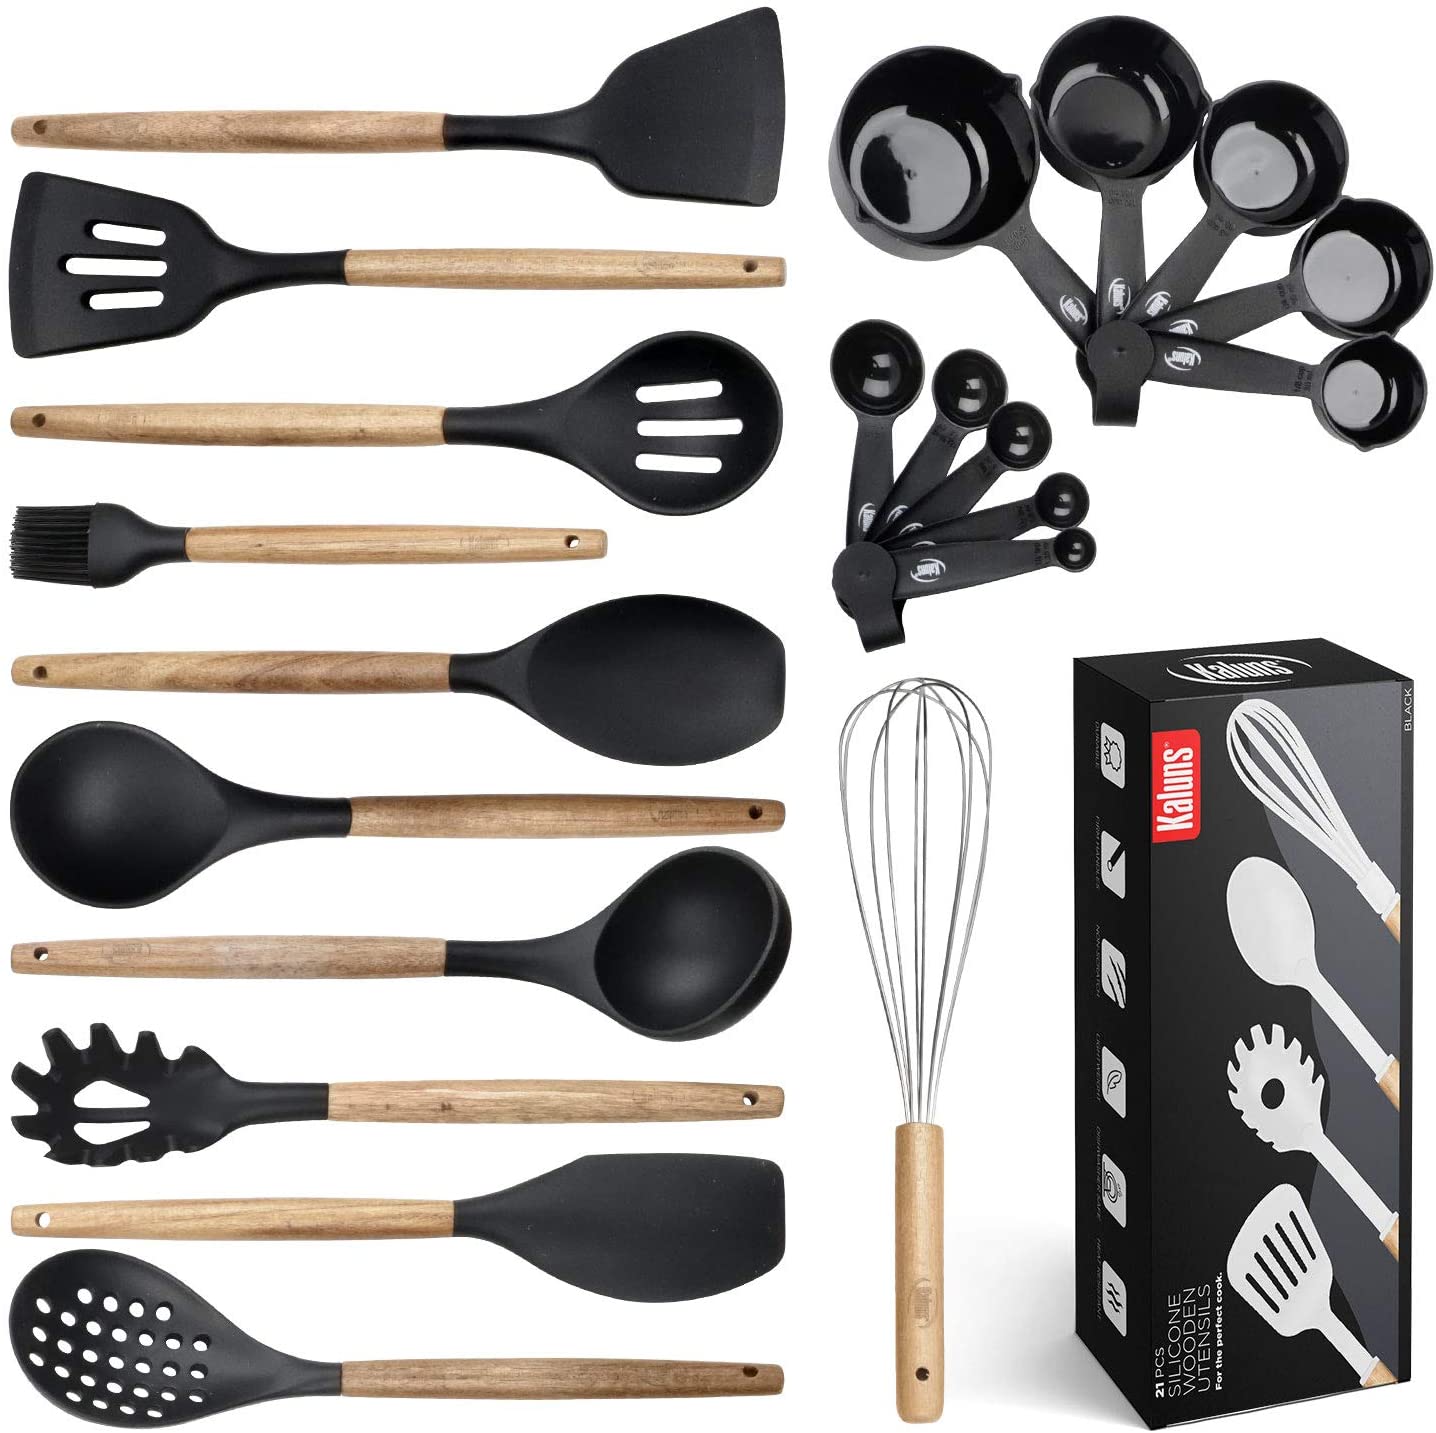 Kaluns Kitchen Utensils Set, 21 Wood and Silicone Cooking Utensil Set, Non-Stick and Heat Resistant Kitchen Utensil Set, Kitchen Tools